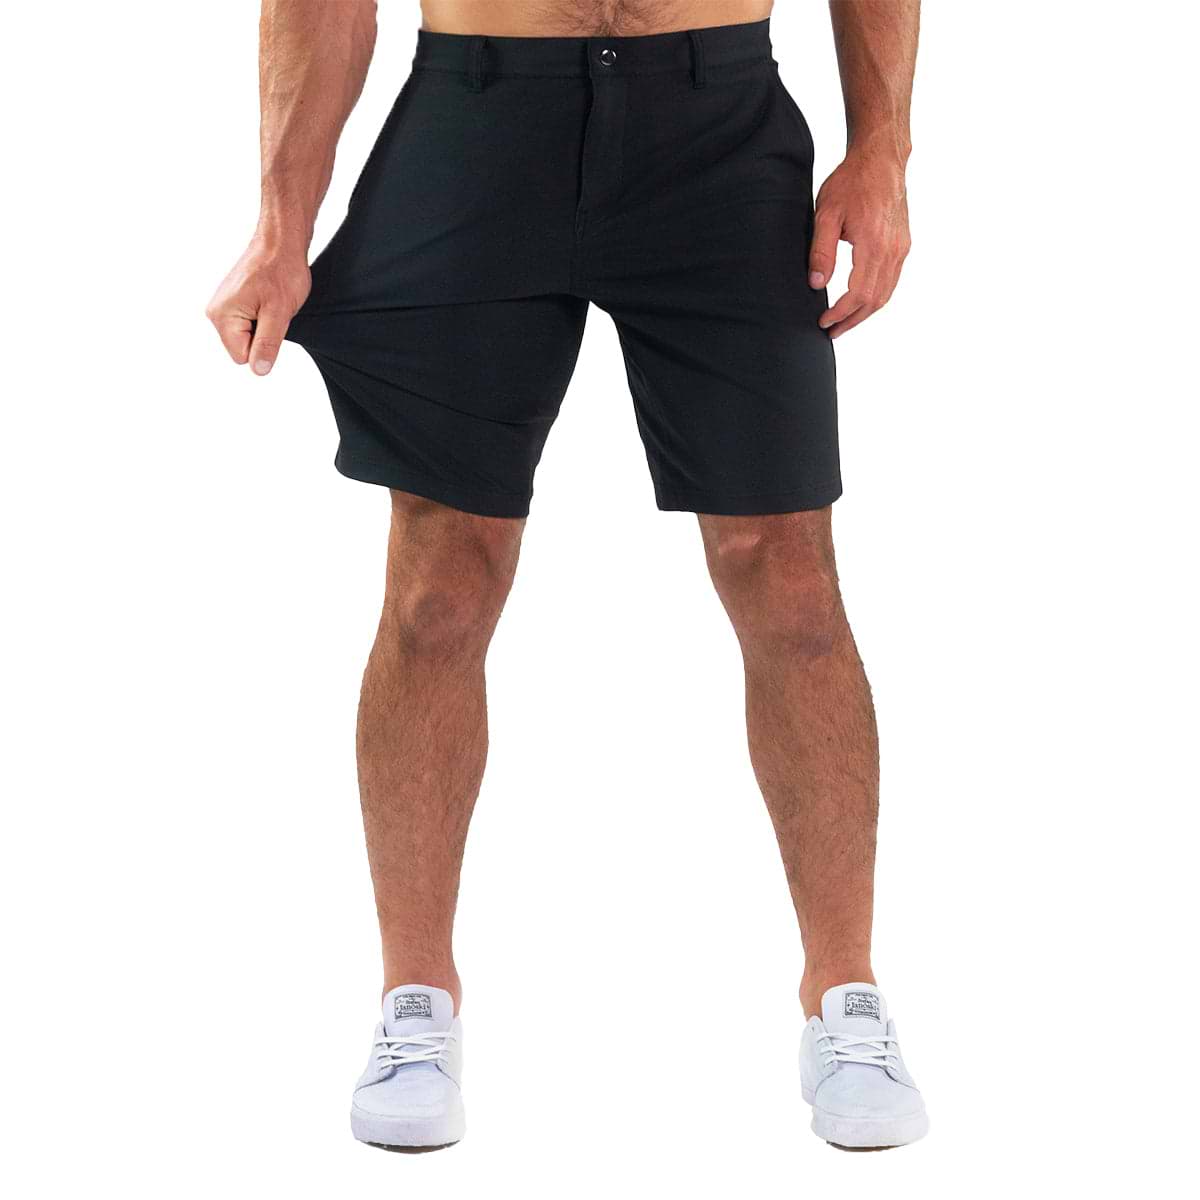 Athletic Fit Performance Shorts